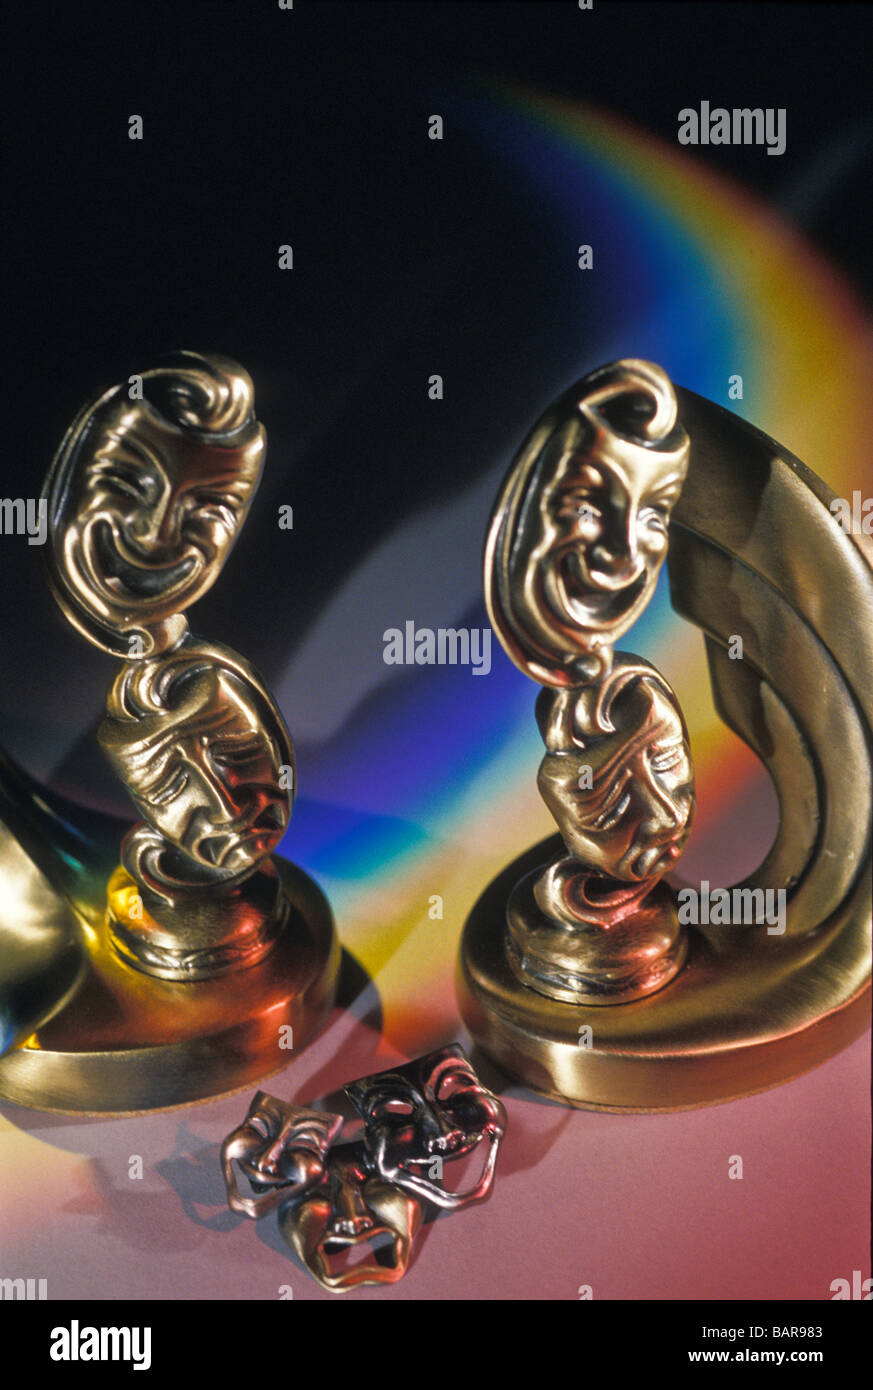 Brass figurines of tragedy and comedy against prjected rainbow of colours background Stock Photo